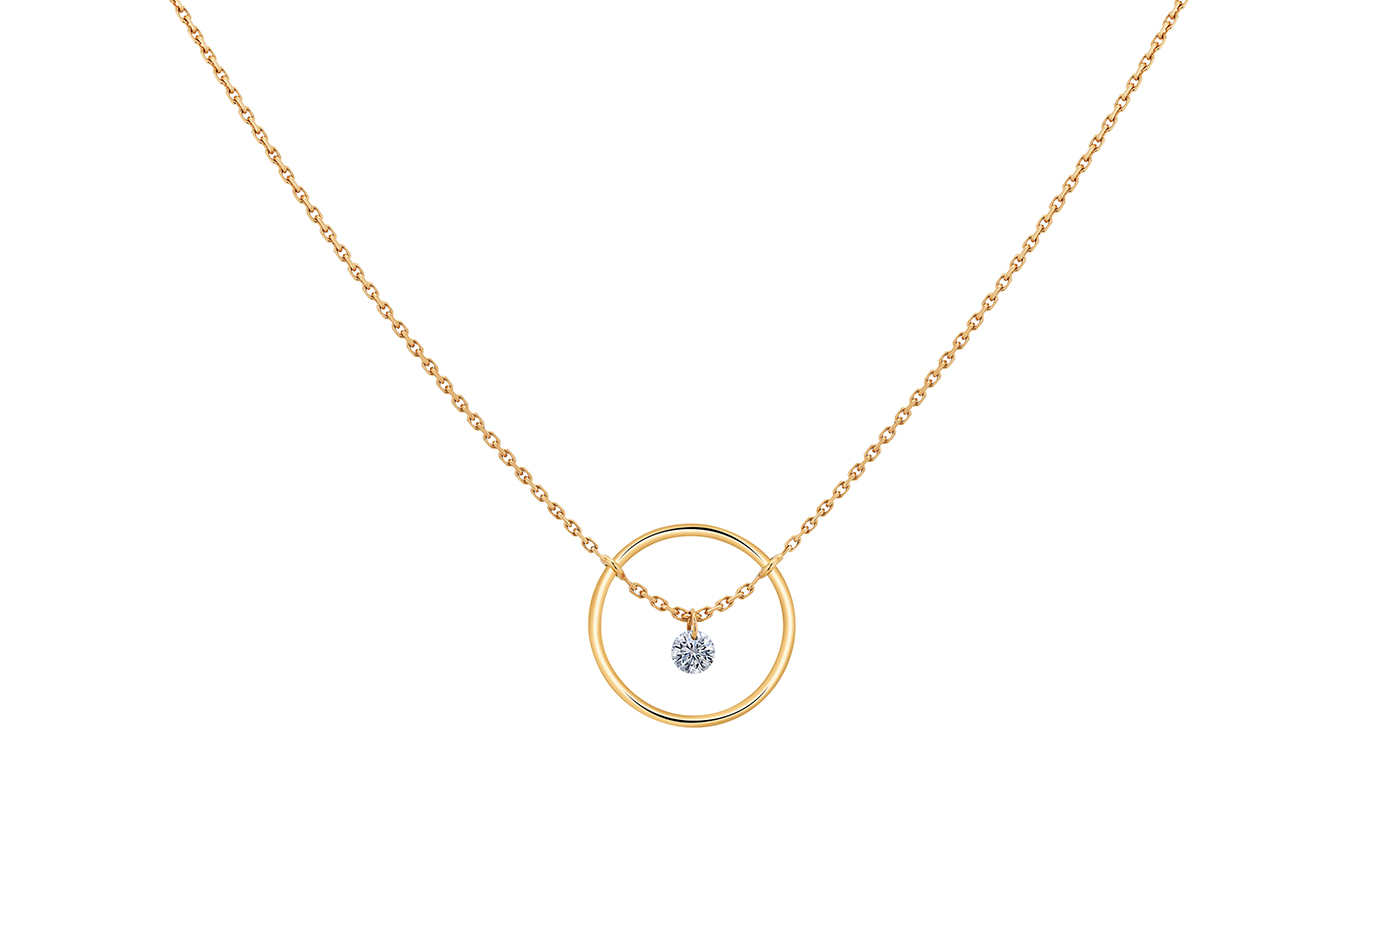 Collier EXCENTRIQUE, diamant GSI, 0,12 ct approx., or 18KT, 2,1gr. 